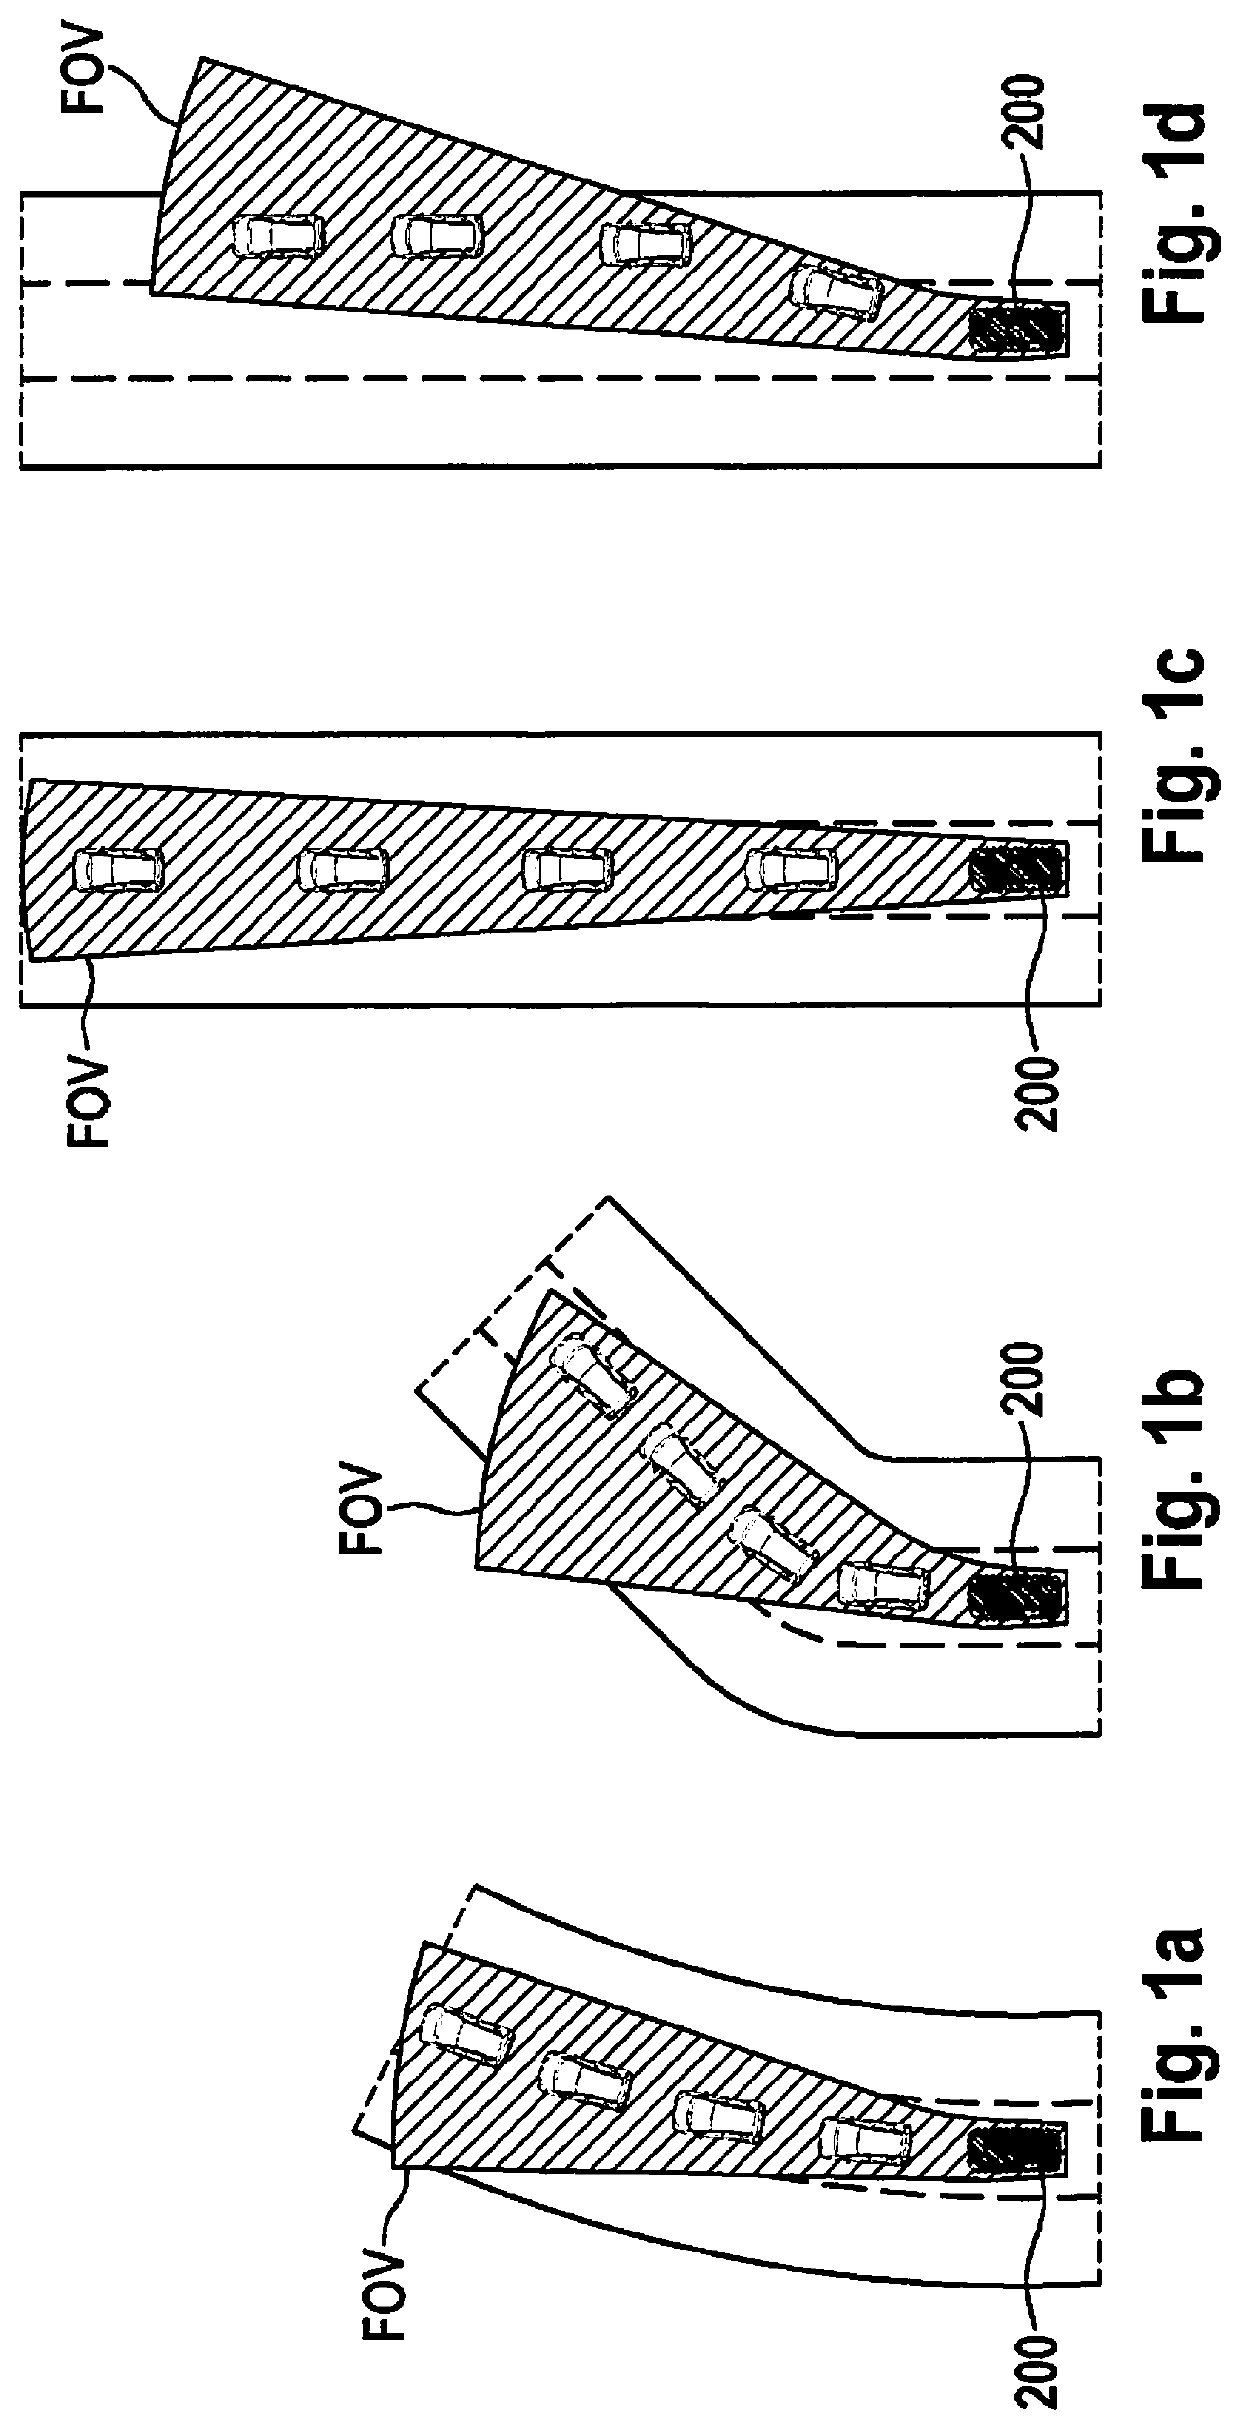 Sensor device for an automated vehicle